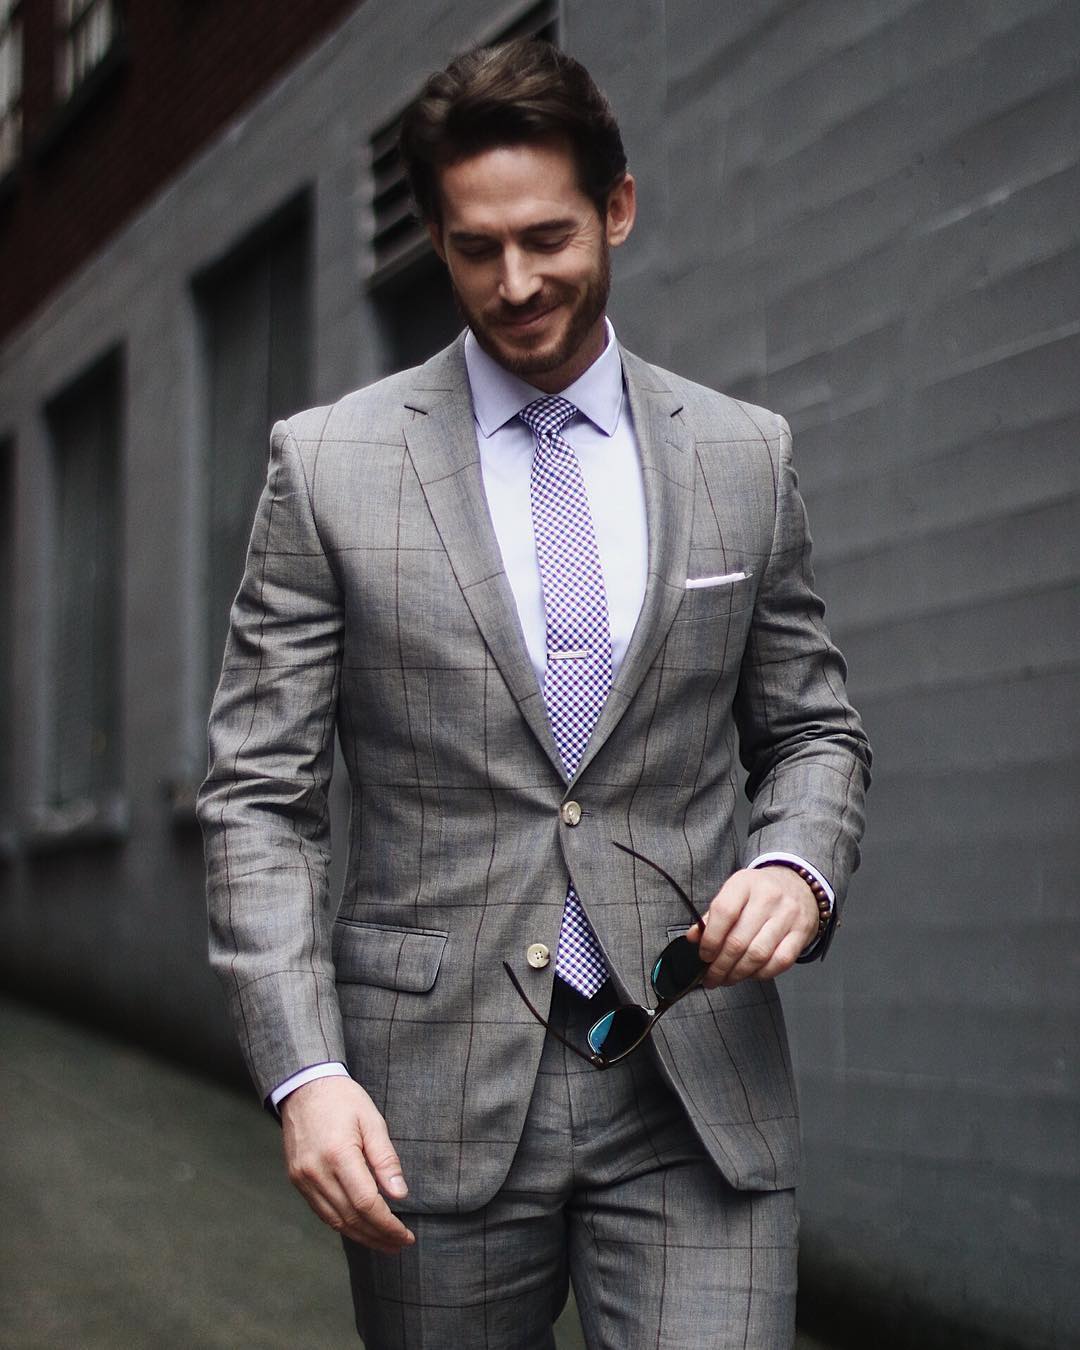 25 Men's Clothing Stores Every Guy Needs In His Life - Fashion HotBox